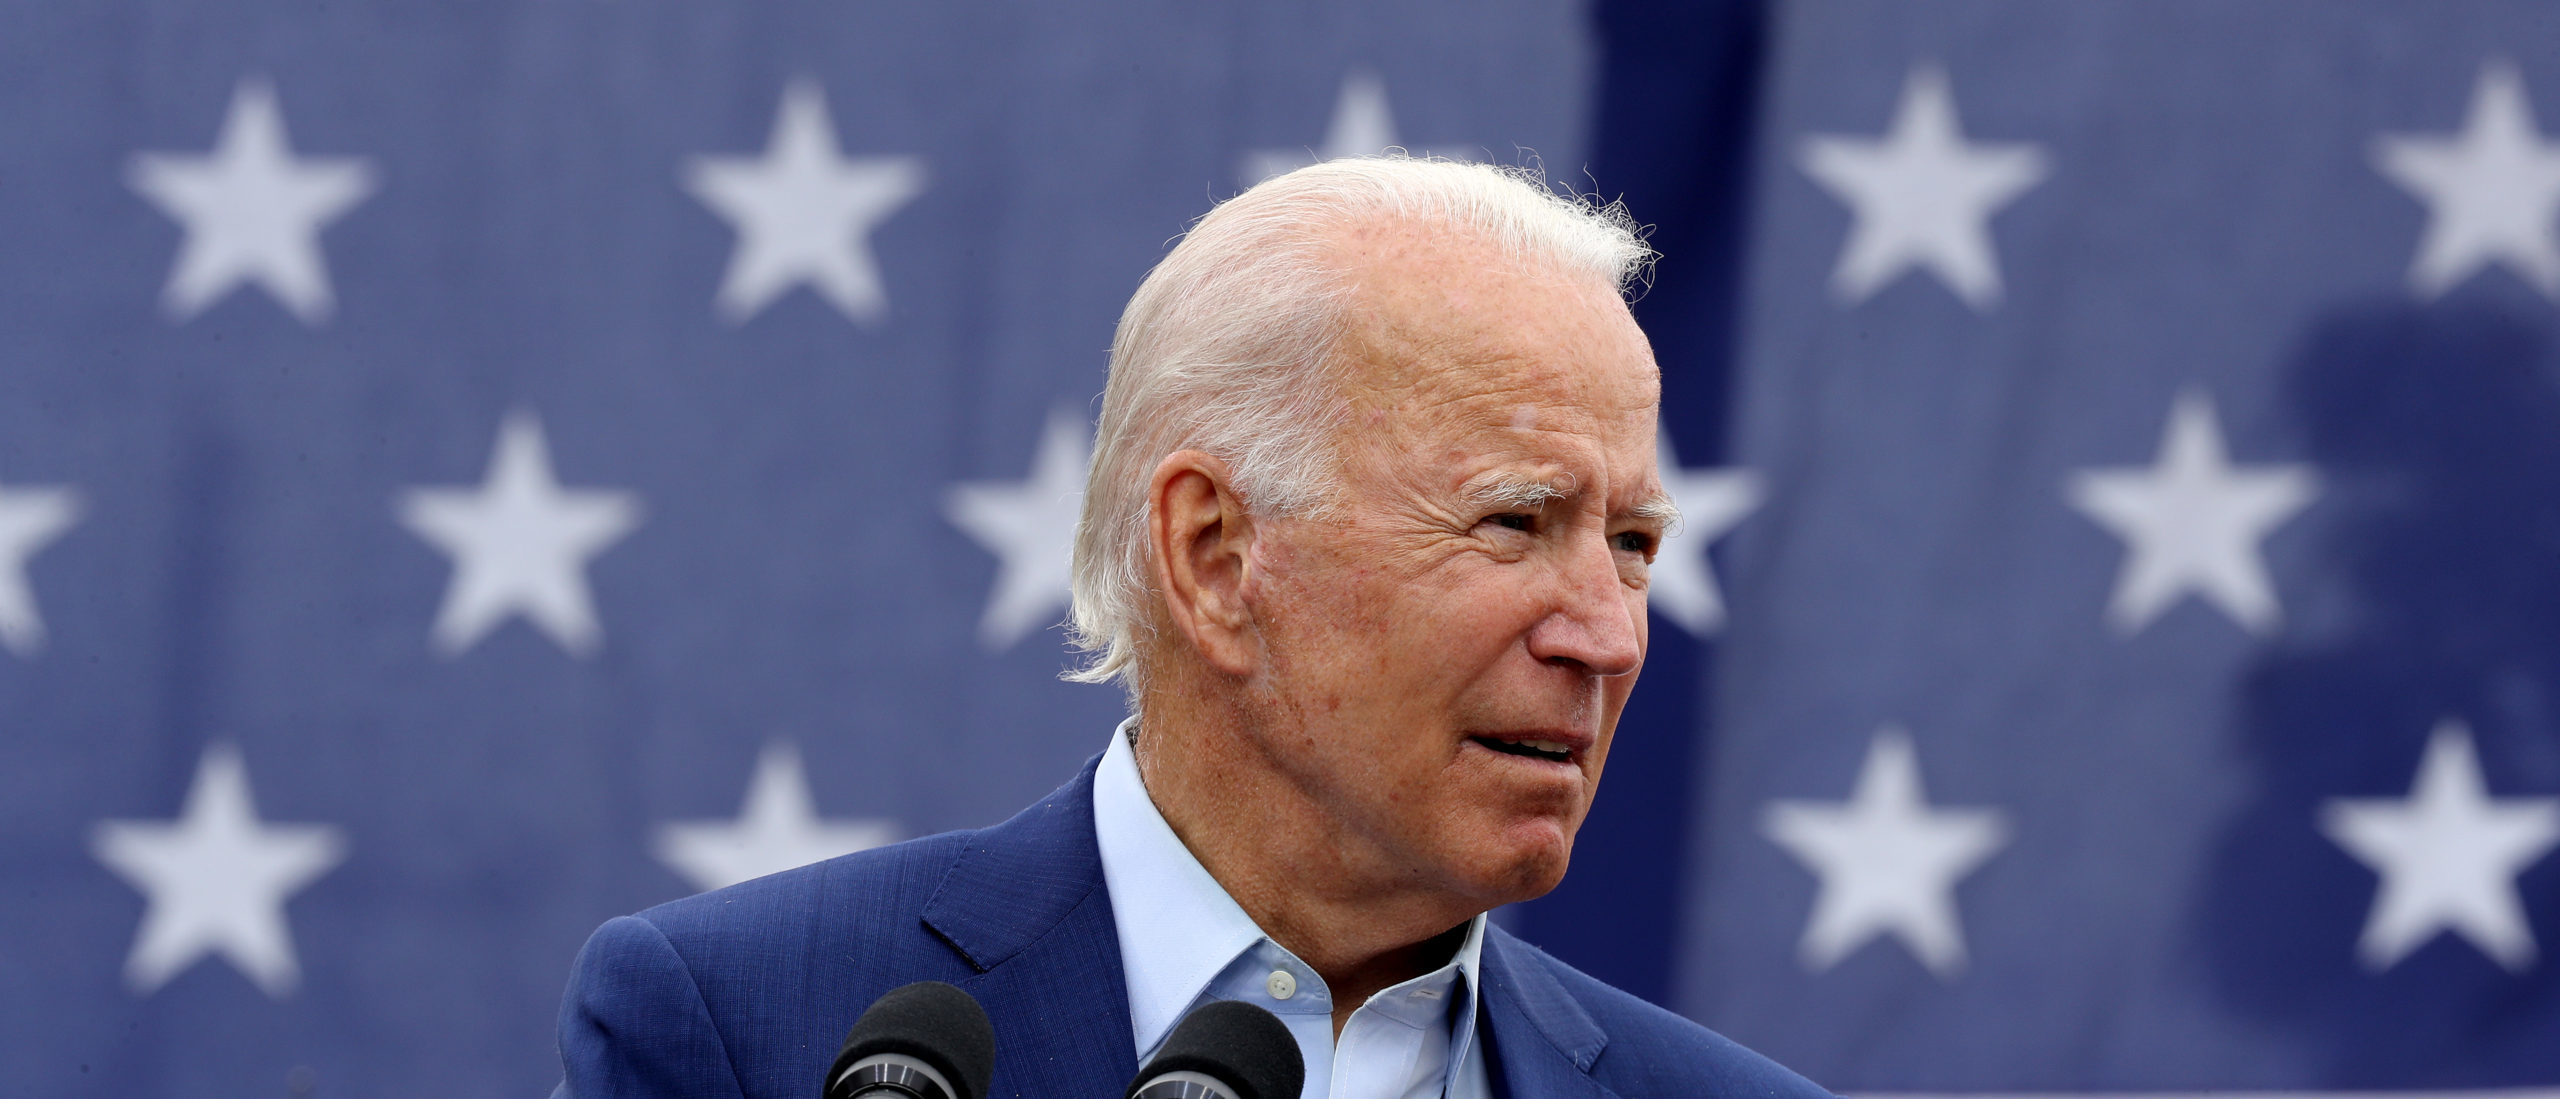 WARREN, MICHIGAN - SEPTEMBER 09: Democratic presidential nominee and former Vice President Joe Biden delivers remarks in the parking lot outside the United Auto Workers Region 1 offices on September 09, 2020 in Warren, Michigan. Biden is campaigning in Michigan, a state President Donald Trump won in 2016 by less than 11,000 votes, the narrowest margin of victory in state's presidential election history. (Photo by Chip Somodevilla/Getty Images)